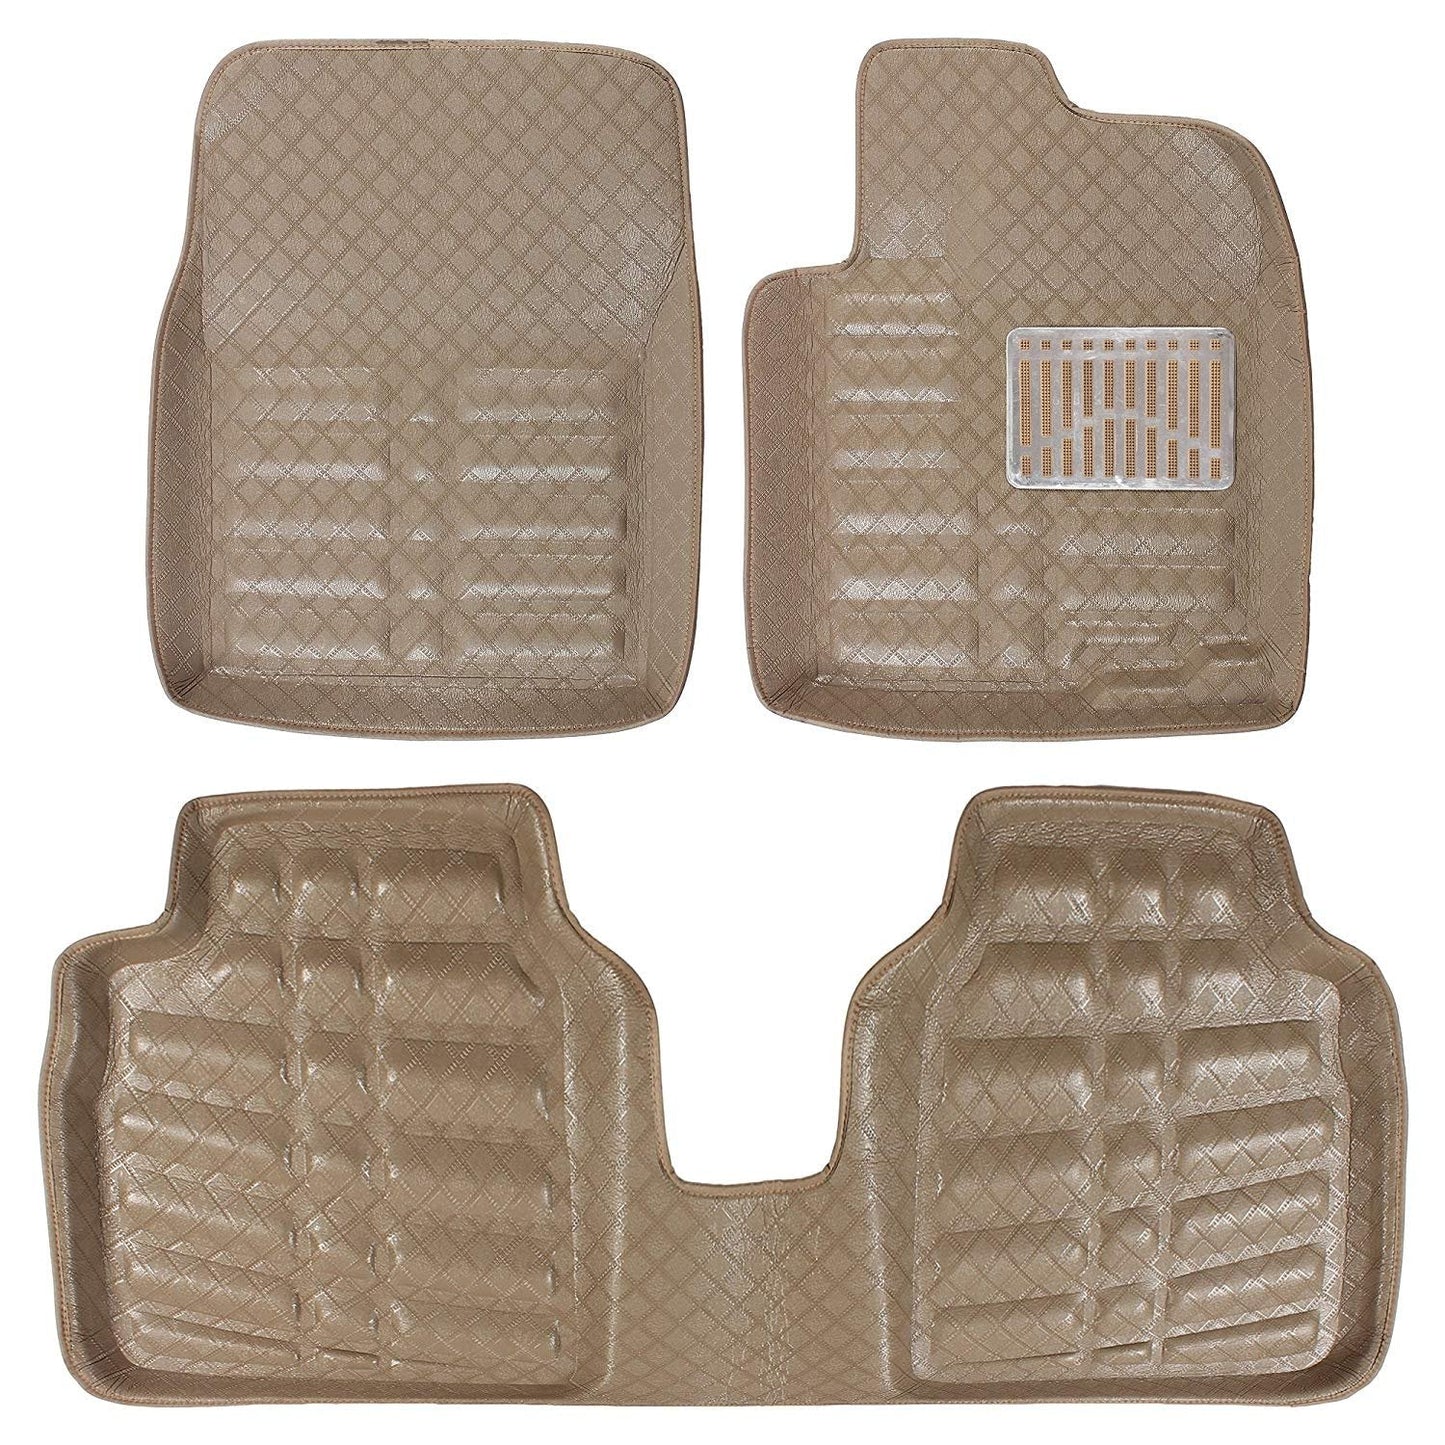 Oshotto 4D Artificial Leather Car Floor Mats For Toyota Urban Cruiser Hyryder 2022 Onwards - Set of 3 (2 pcs Front & one Long Single Rear pc) - Beige